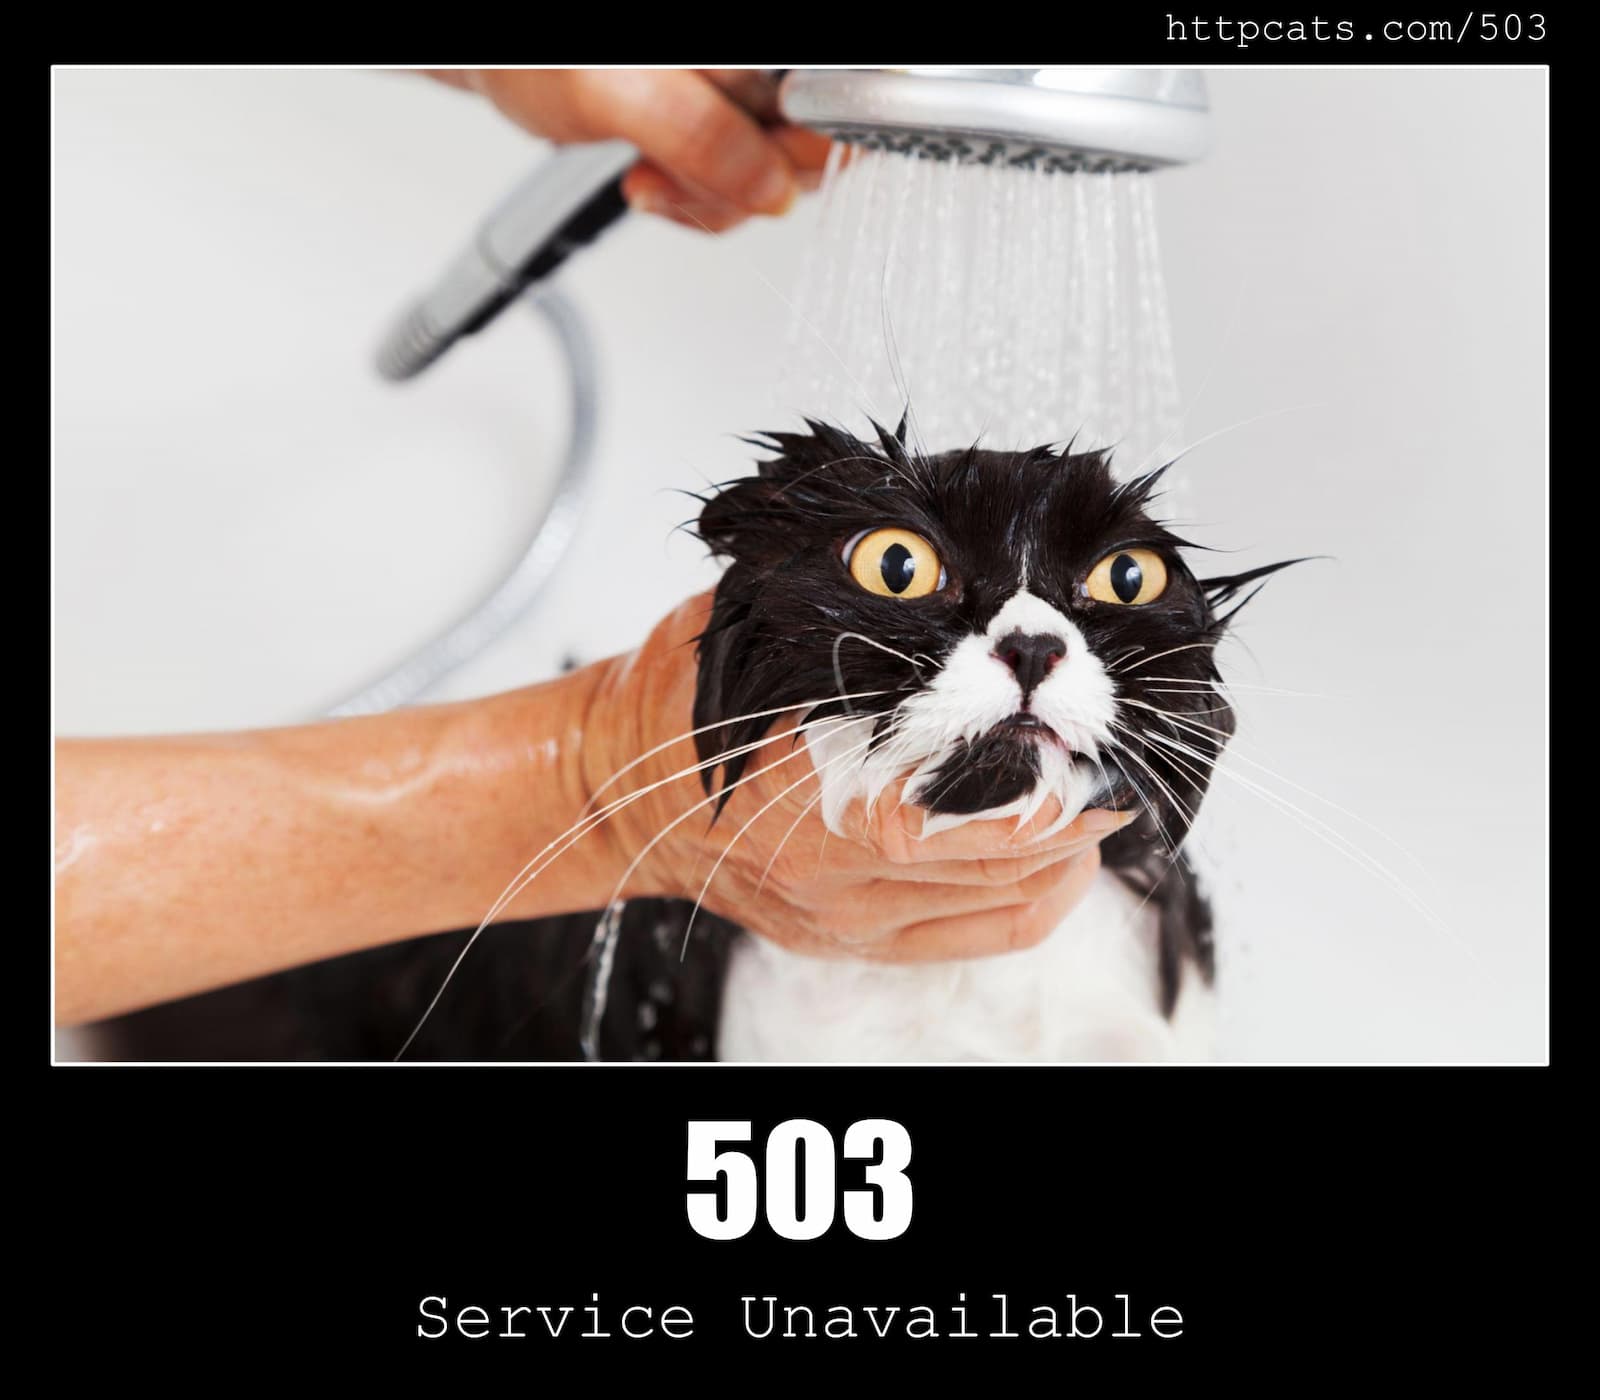 HTTP Status Code 503 Service Unavailable & Cats